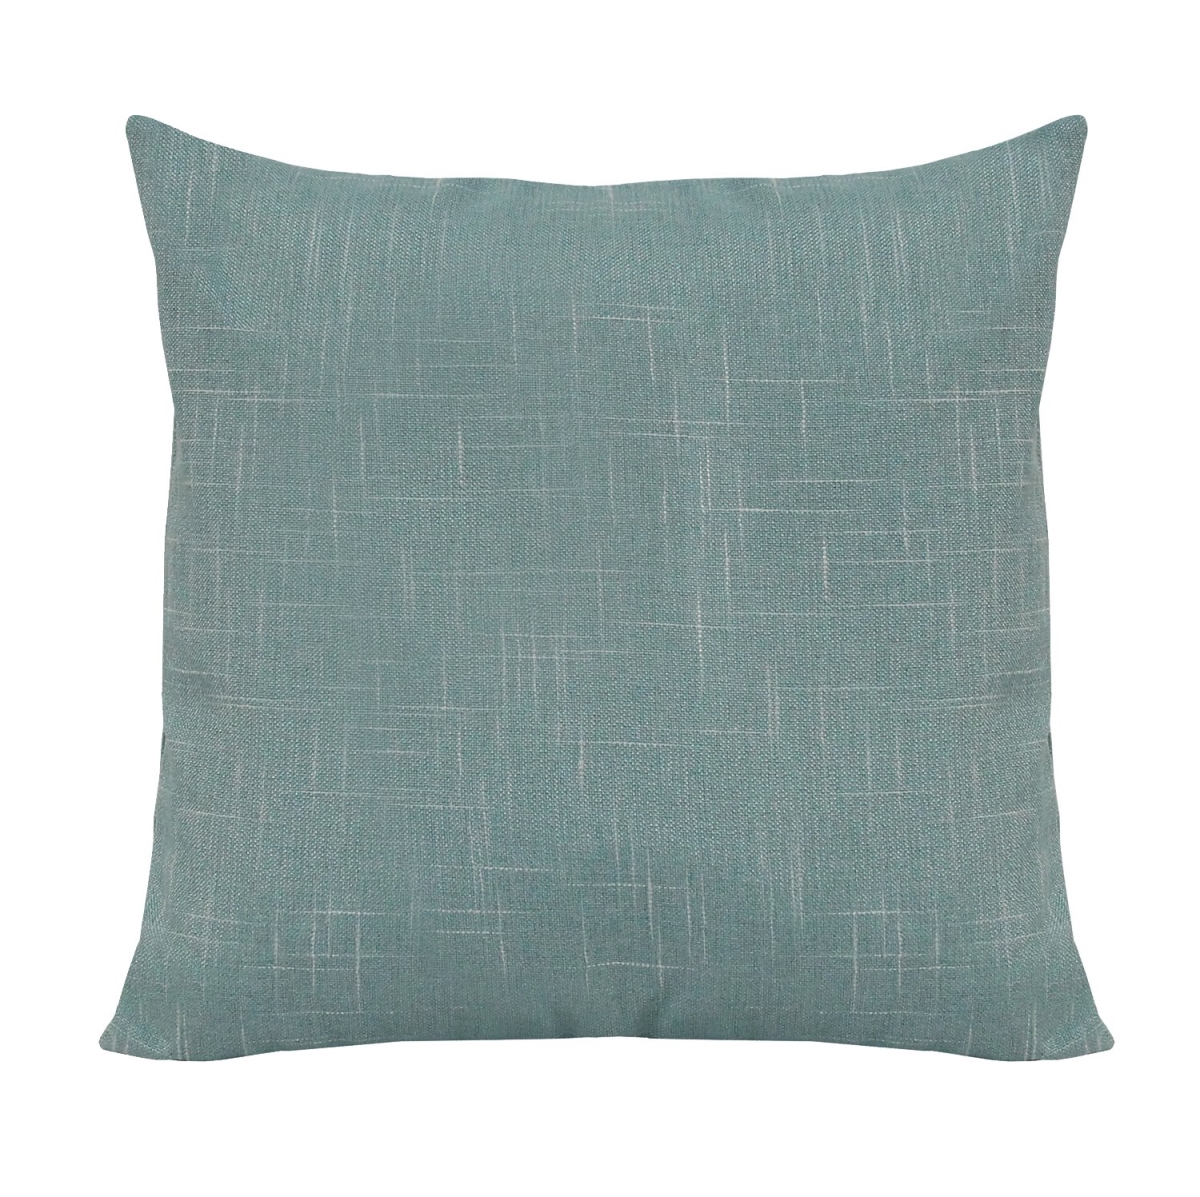 Home Roots Beddings 329359 Tweed Pillow, Teal Blue